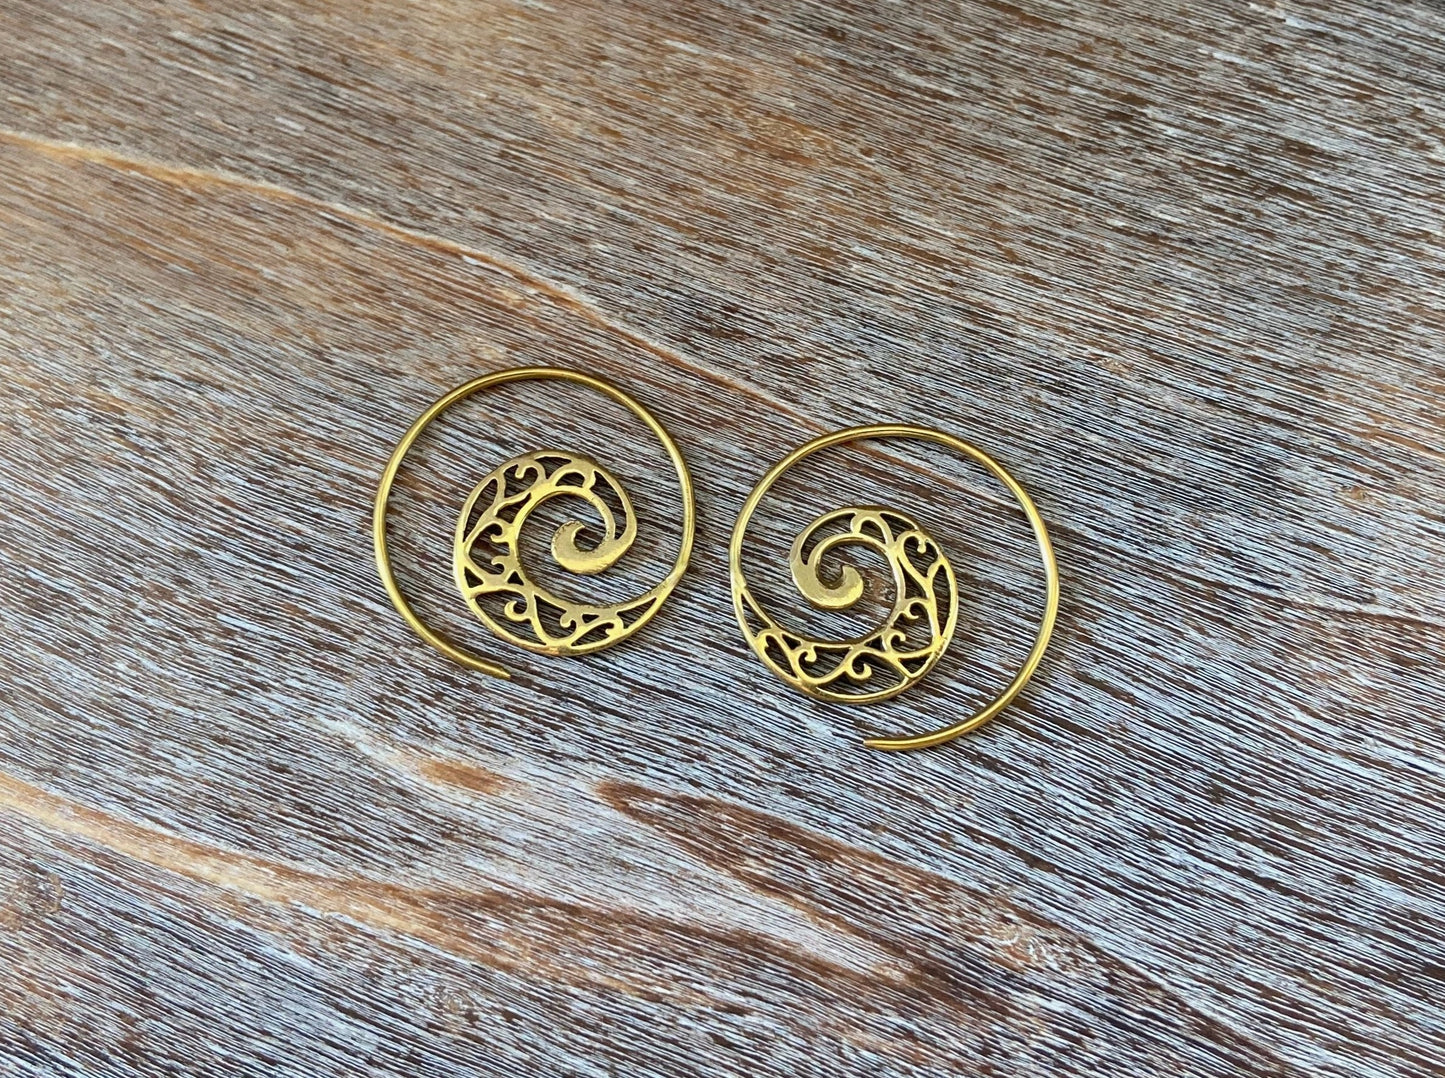 small spiral earrings with a filigree pattern made of brass 